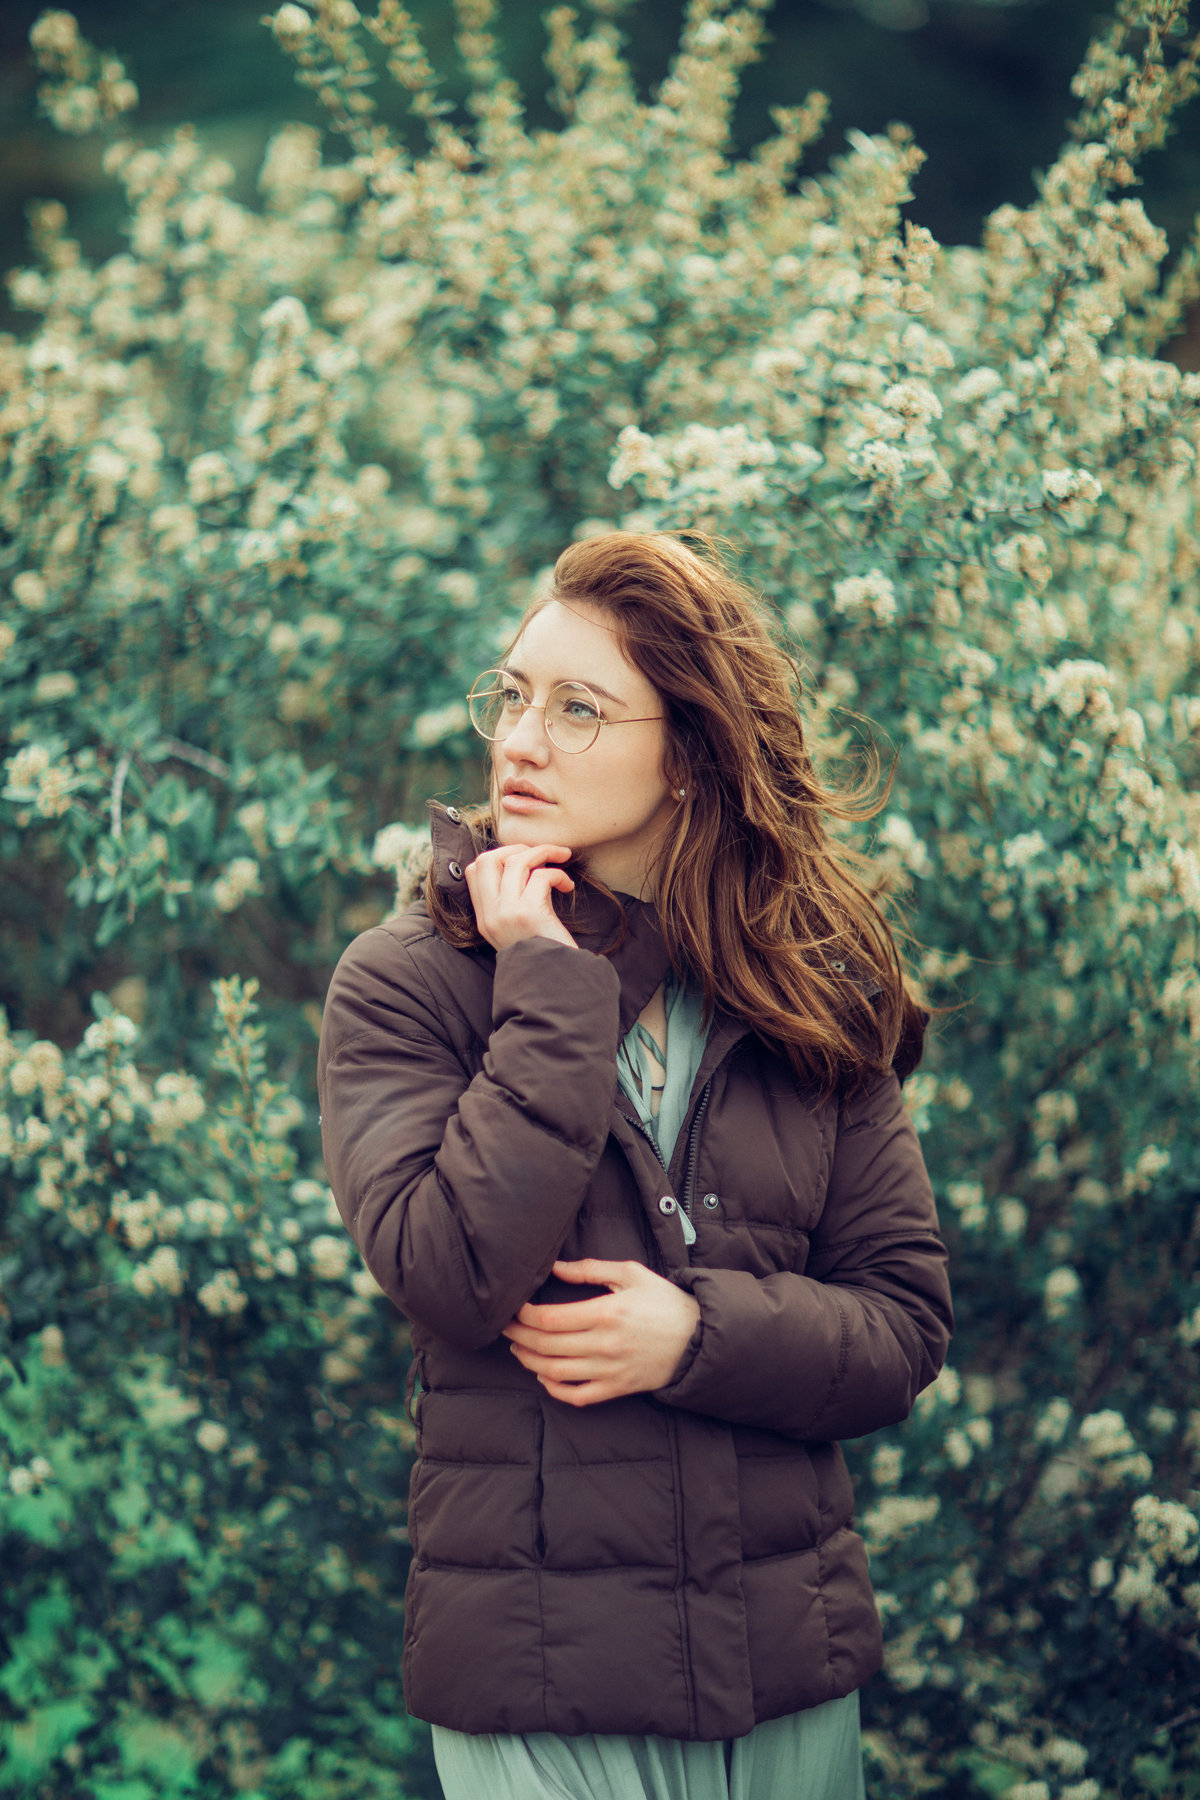 Portrait Photo Of Young Woman In Brown Coat Wearing Eye Glasses Los Angeles